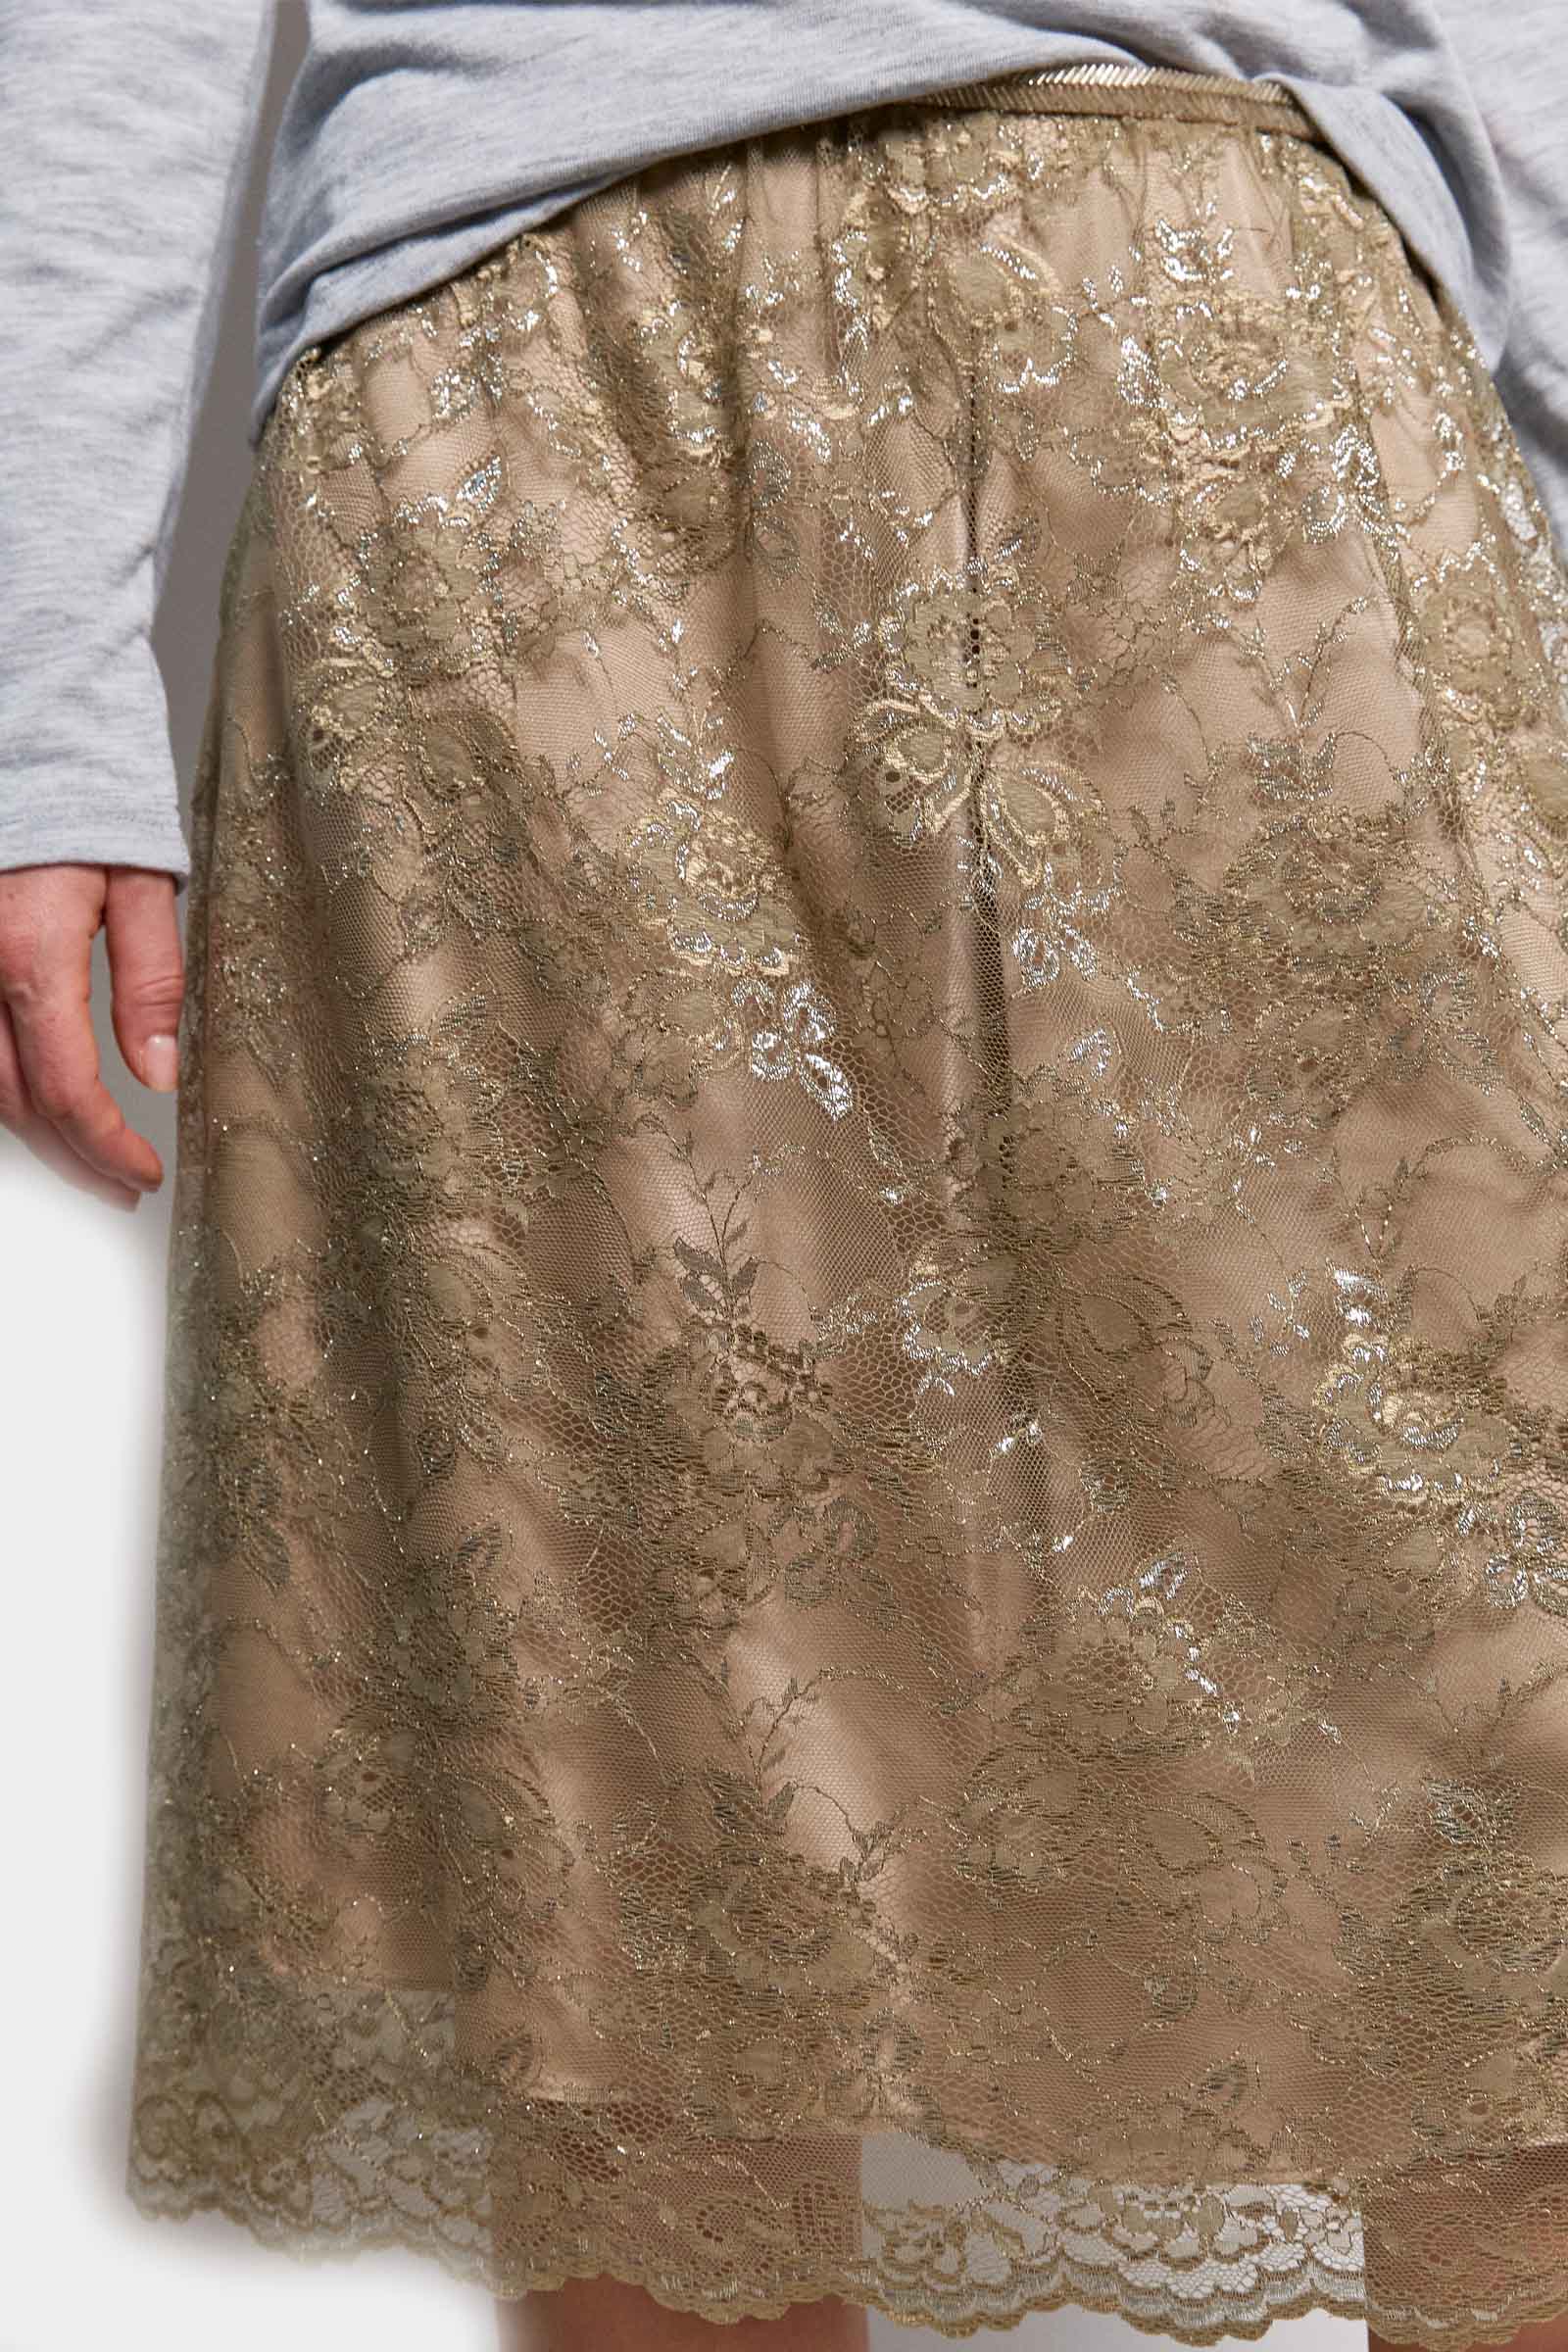 re-luxed | rl01019 | 3.1 Phillip Lim lace pattern glitter accents skirt